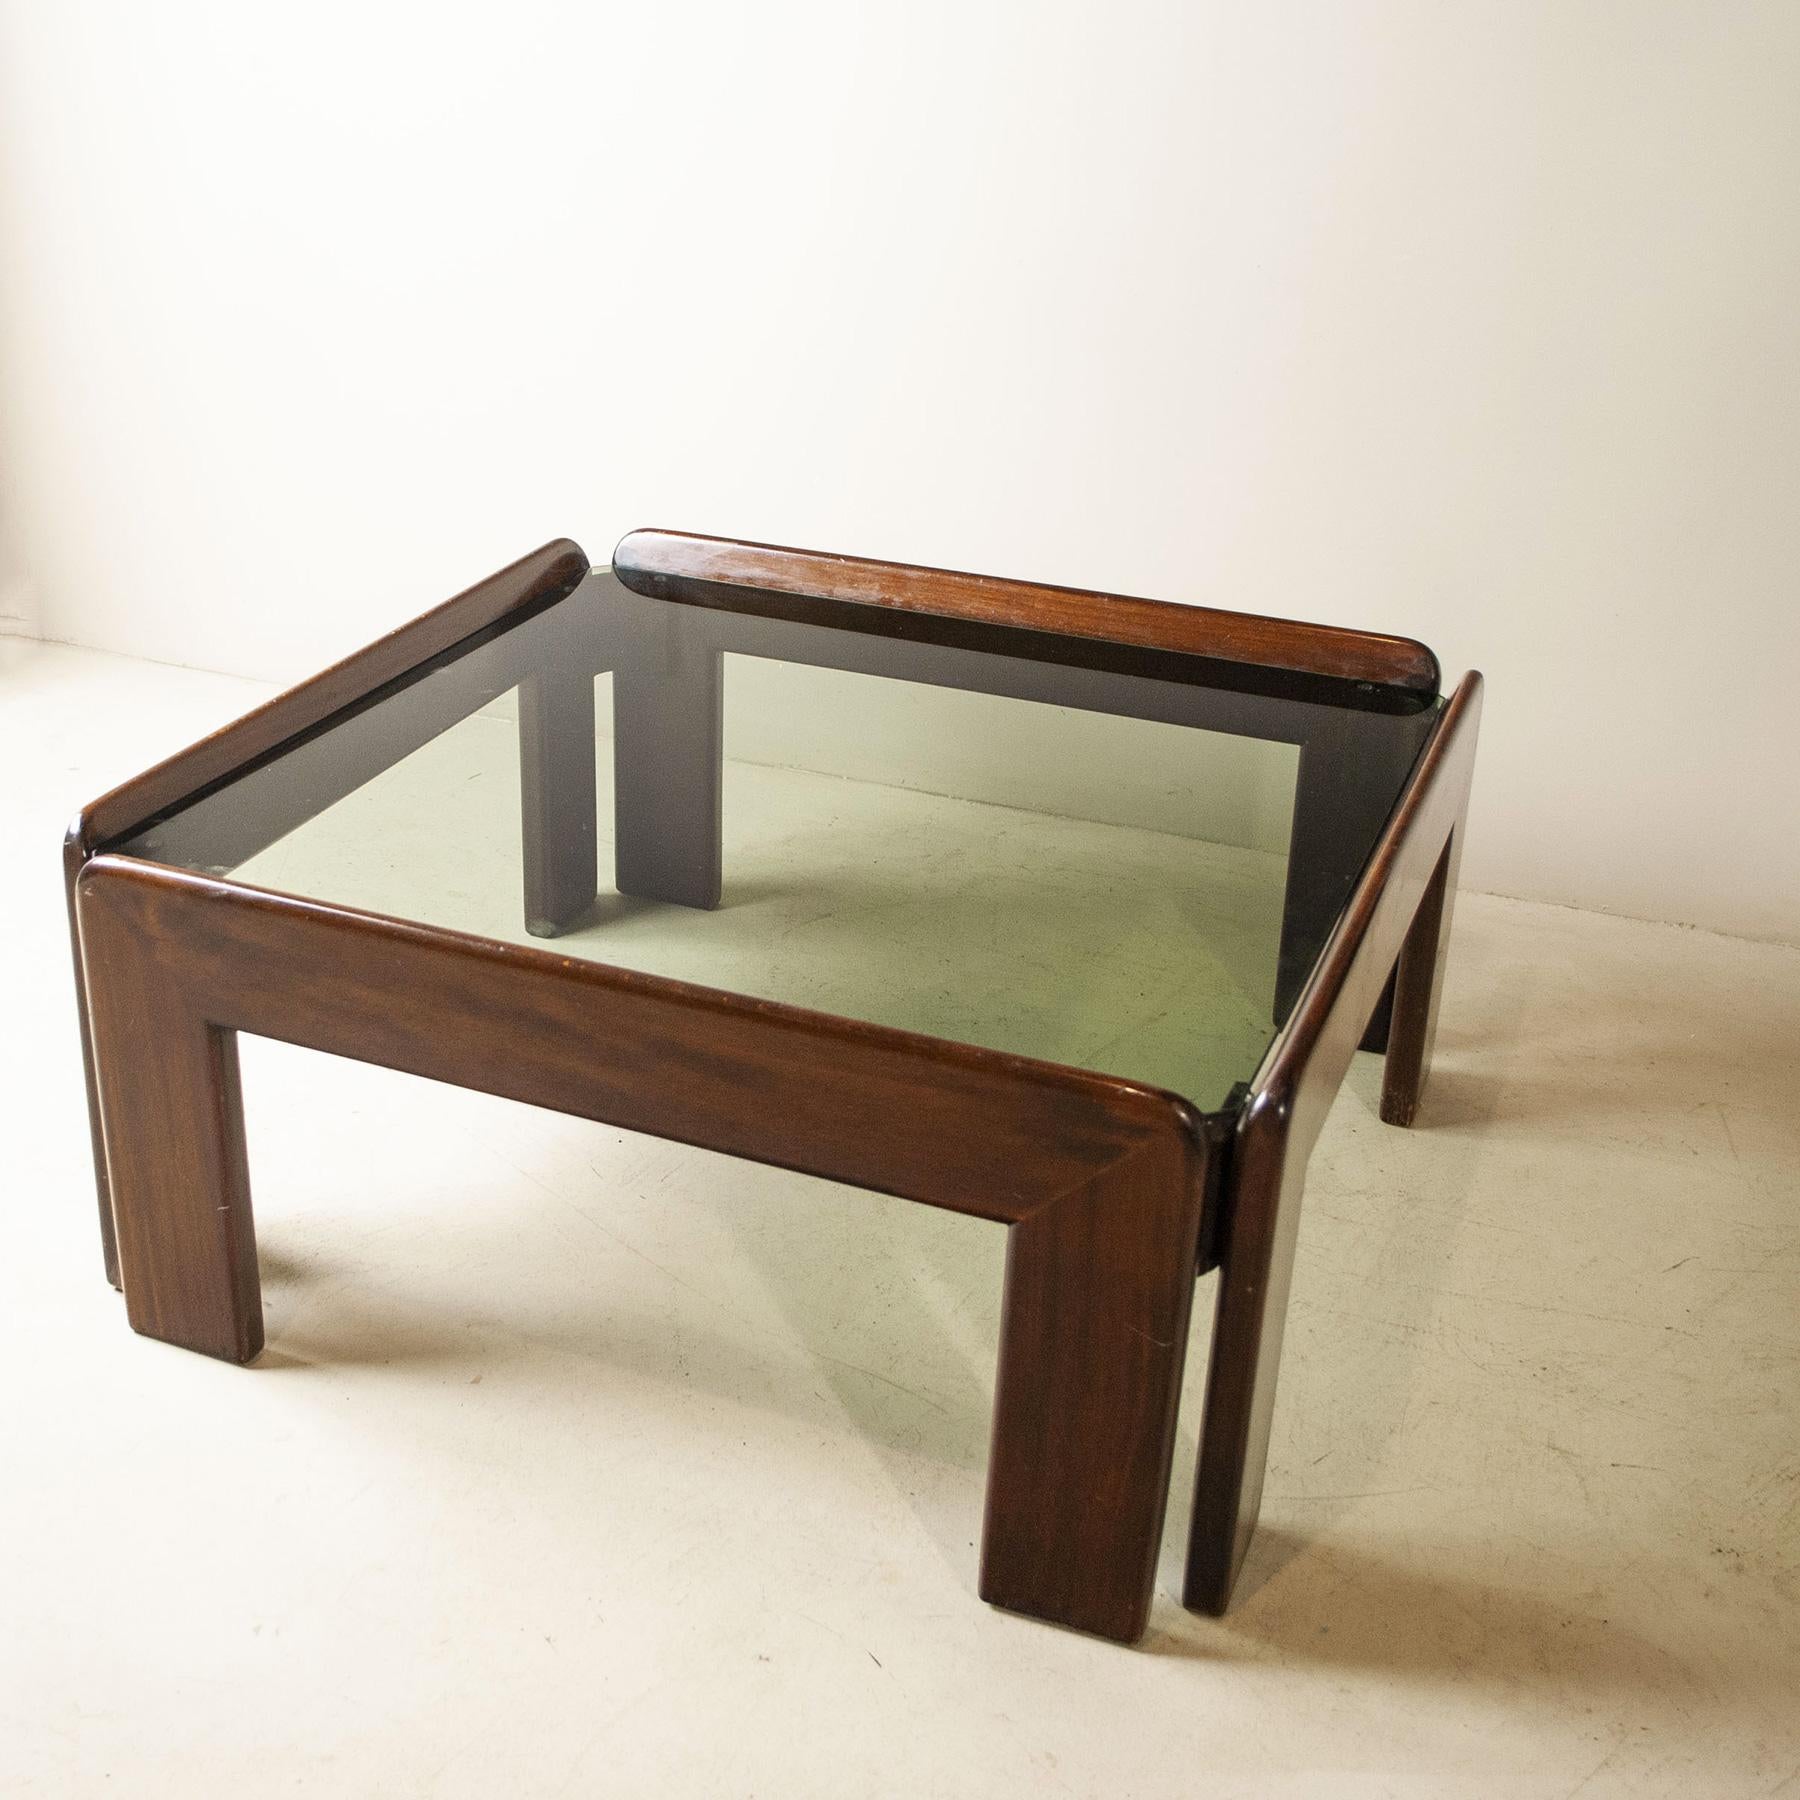 Italian Afra & Tobia Scarpa coffee table from the 70's.